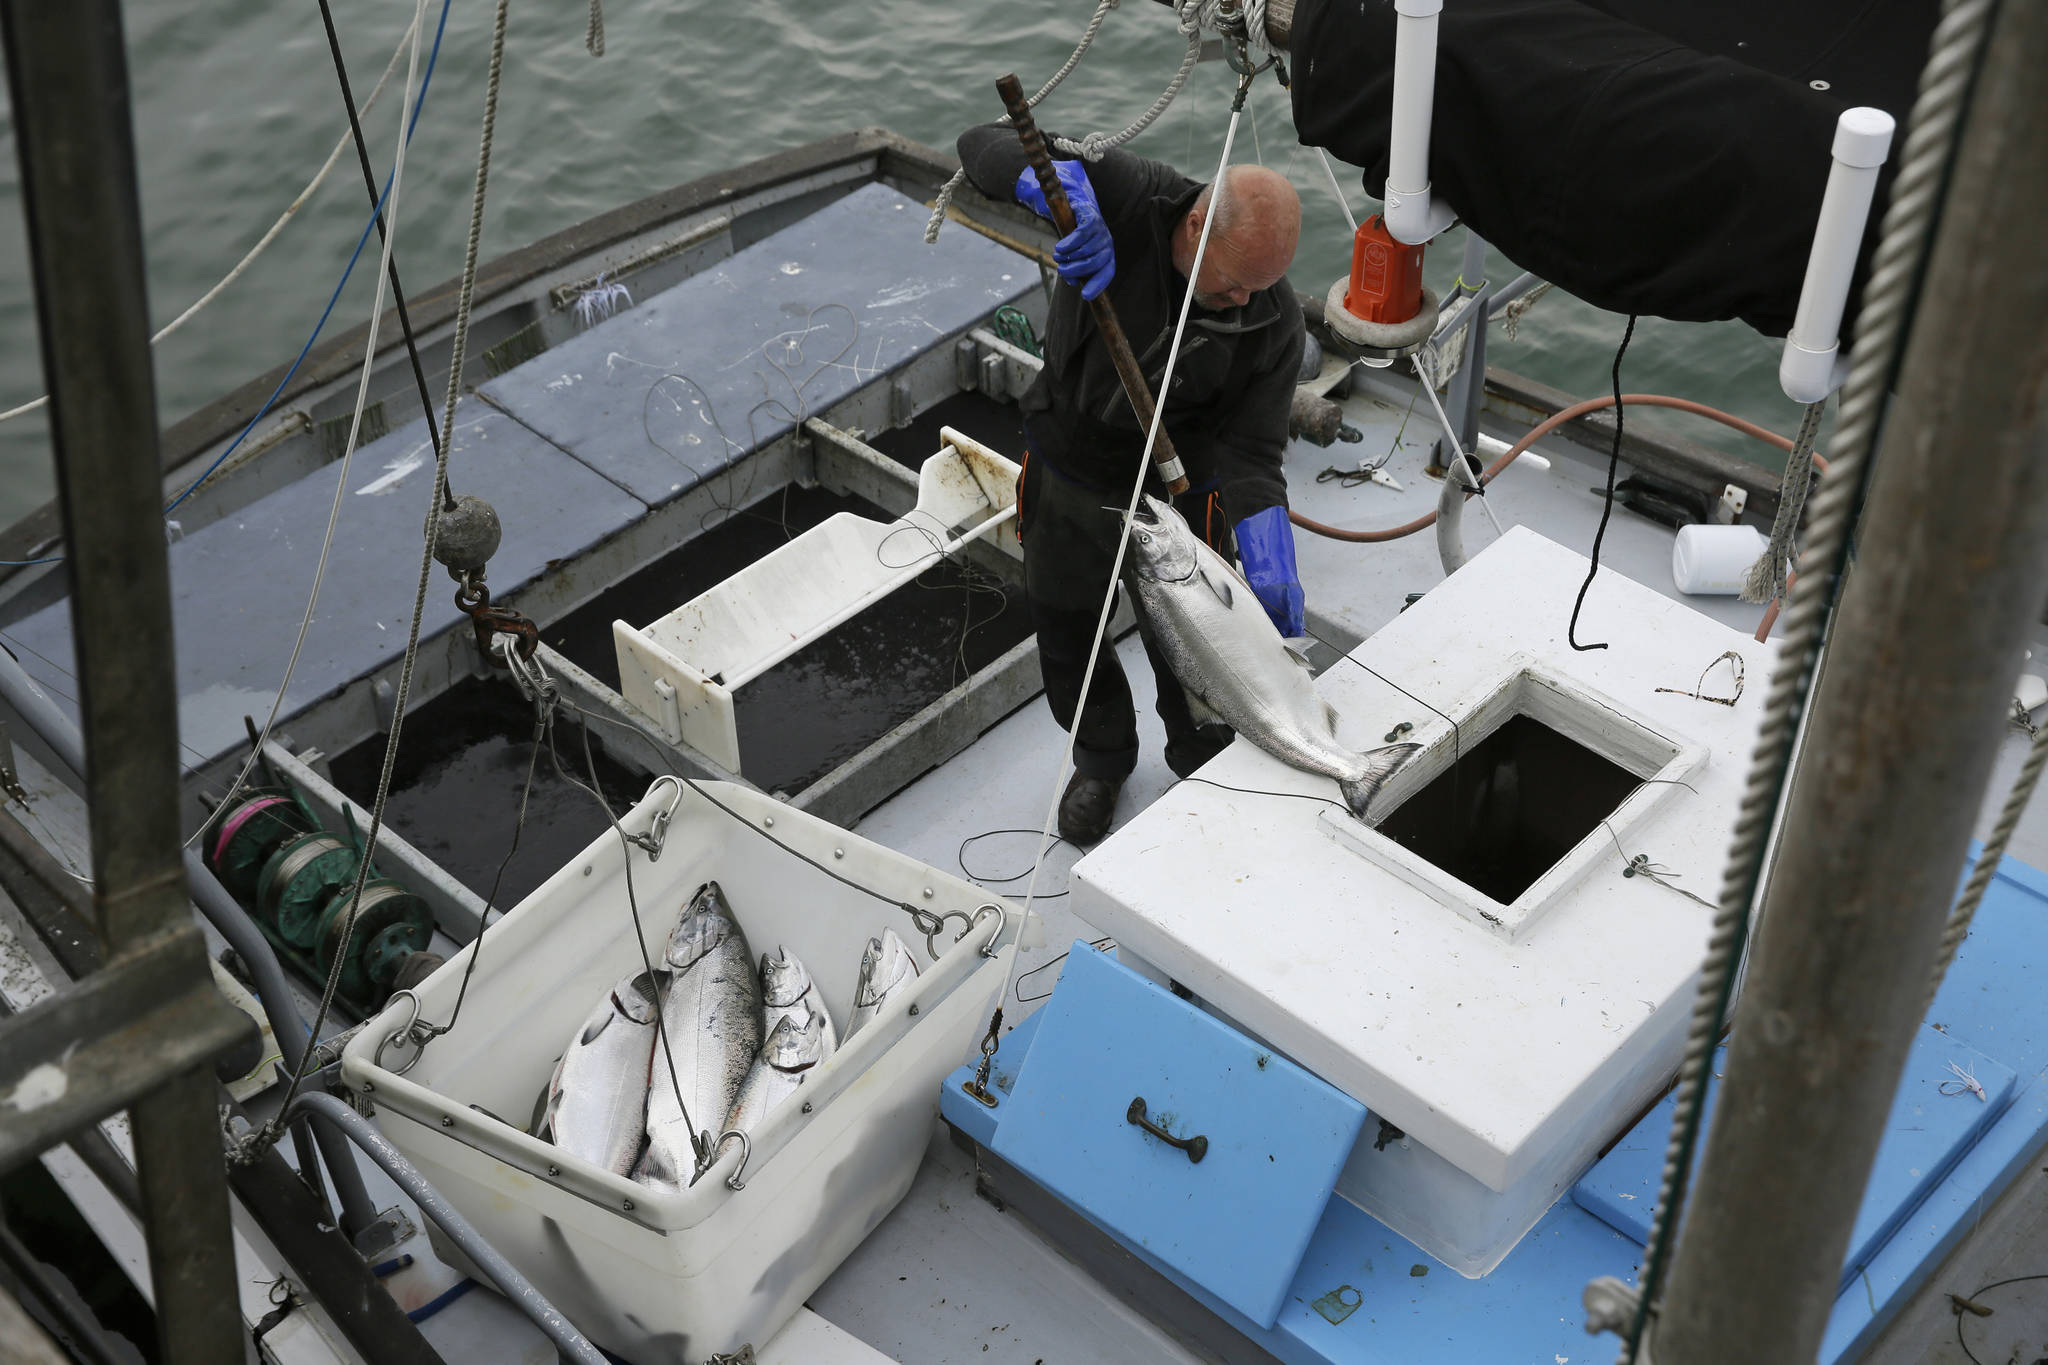 In this photo taken Monday, July 22, 2019, Mike Hudson unloads chinook salmon off his boat at Fisherman’s Wharf in San Francisco. California fishermen are reporting one of the best salmon fishing seasons in more than a decade, thanks to heavy rain and snow that ended the state’s historic drought. It’s a sharp reversal for chinook salmon, also known as king salmon, an iconic fish that helps sustain many Pacific Coast fishing communities. (AP Photo/Eric Risberg)